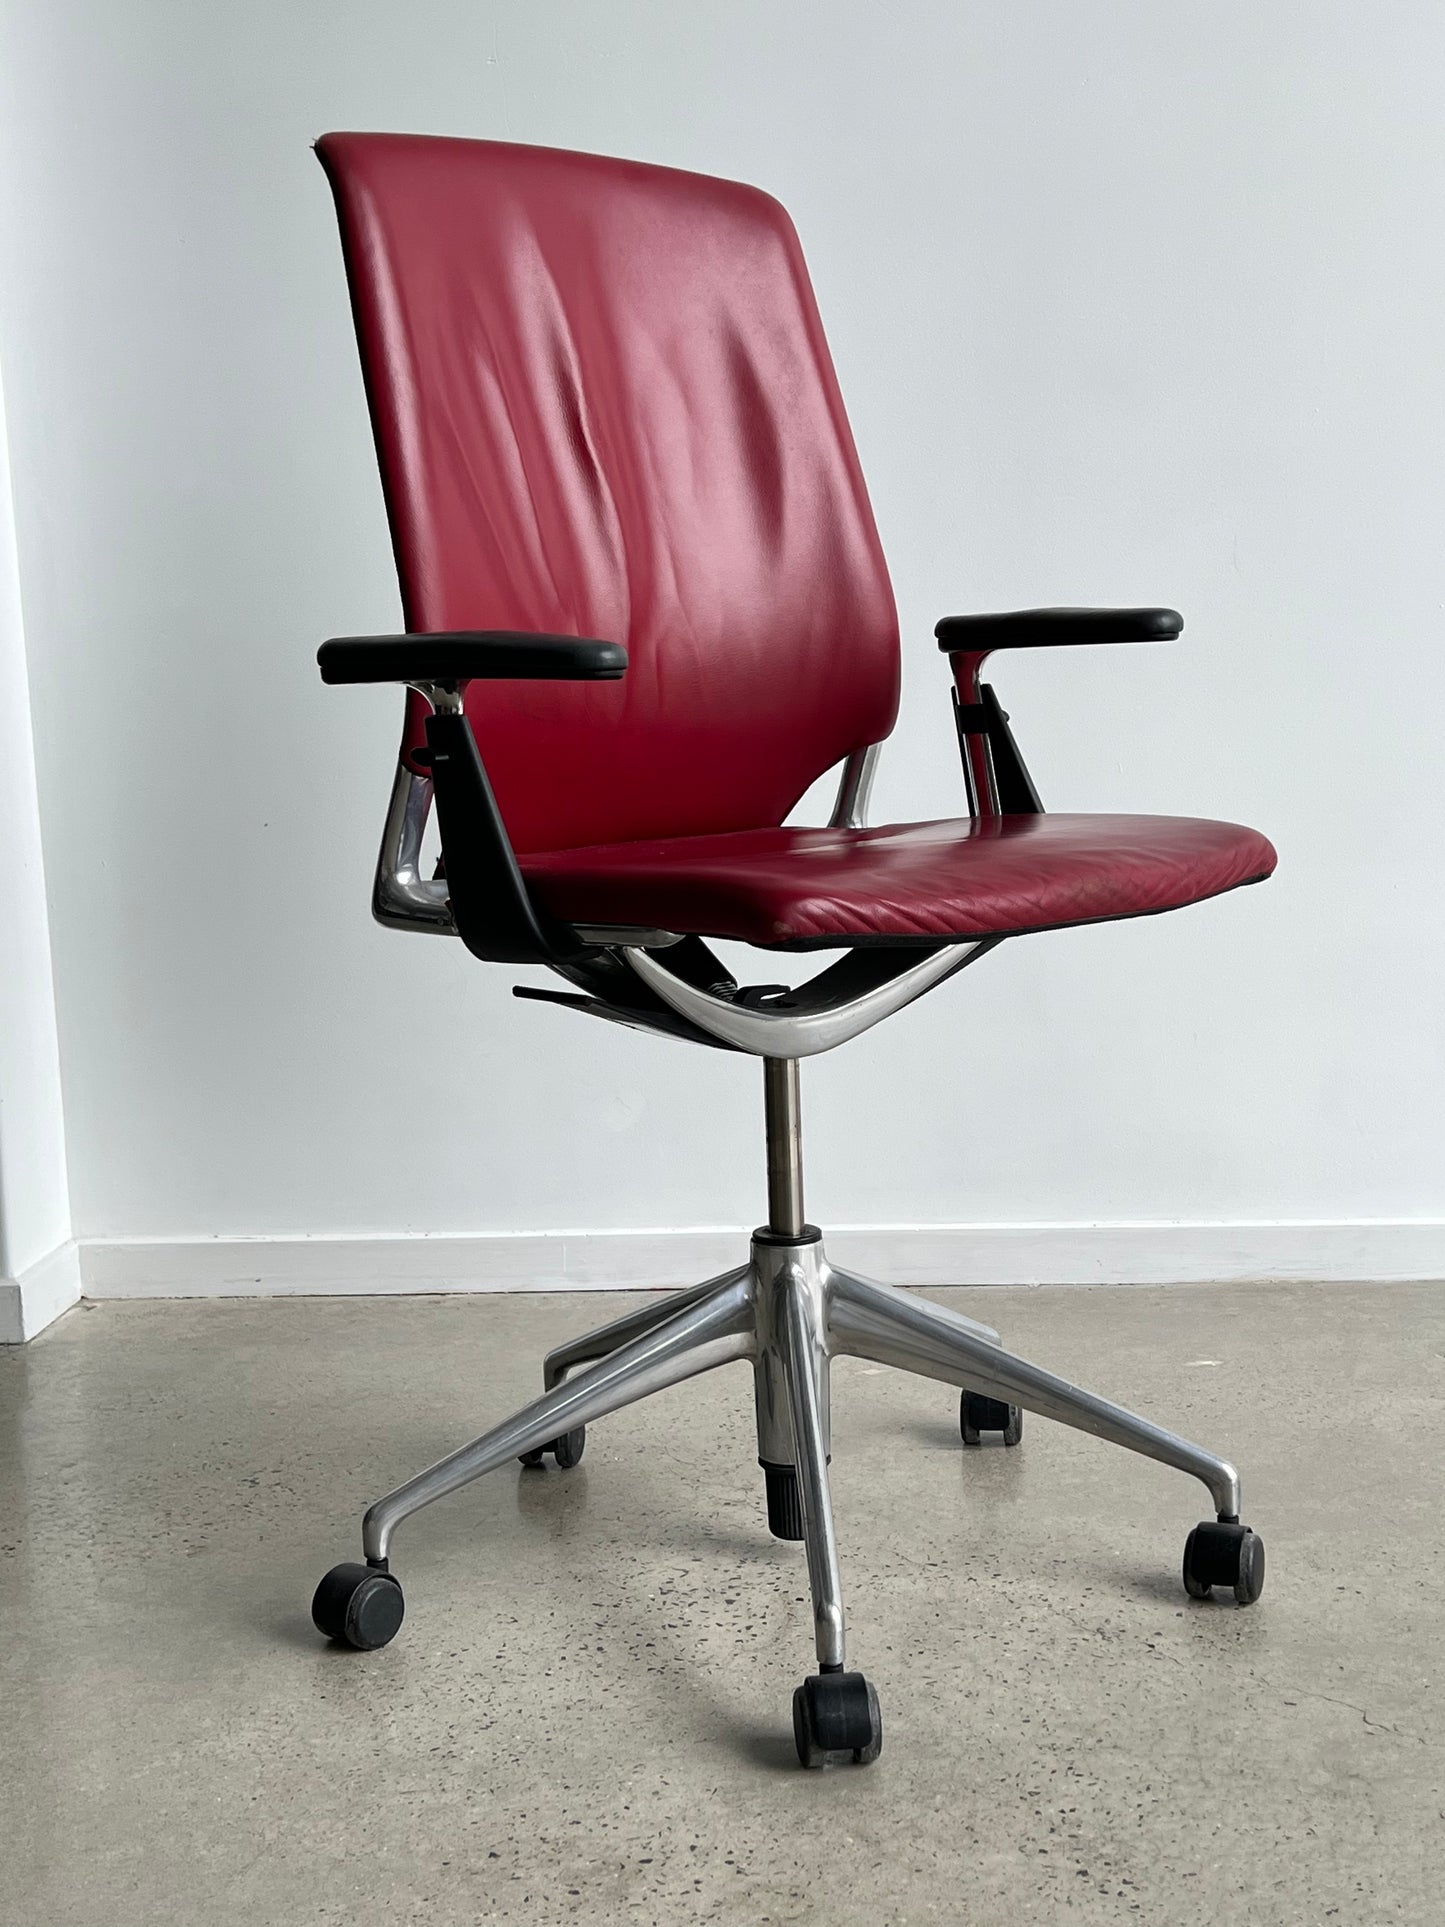 Alberto Meda for Vitra, Office Chair in Red Leather, 1990s